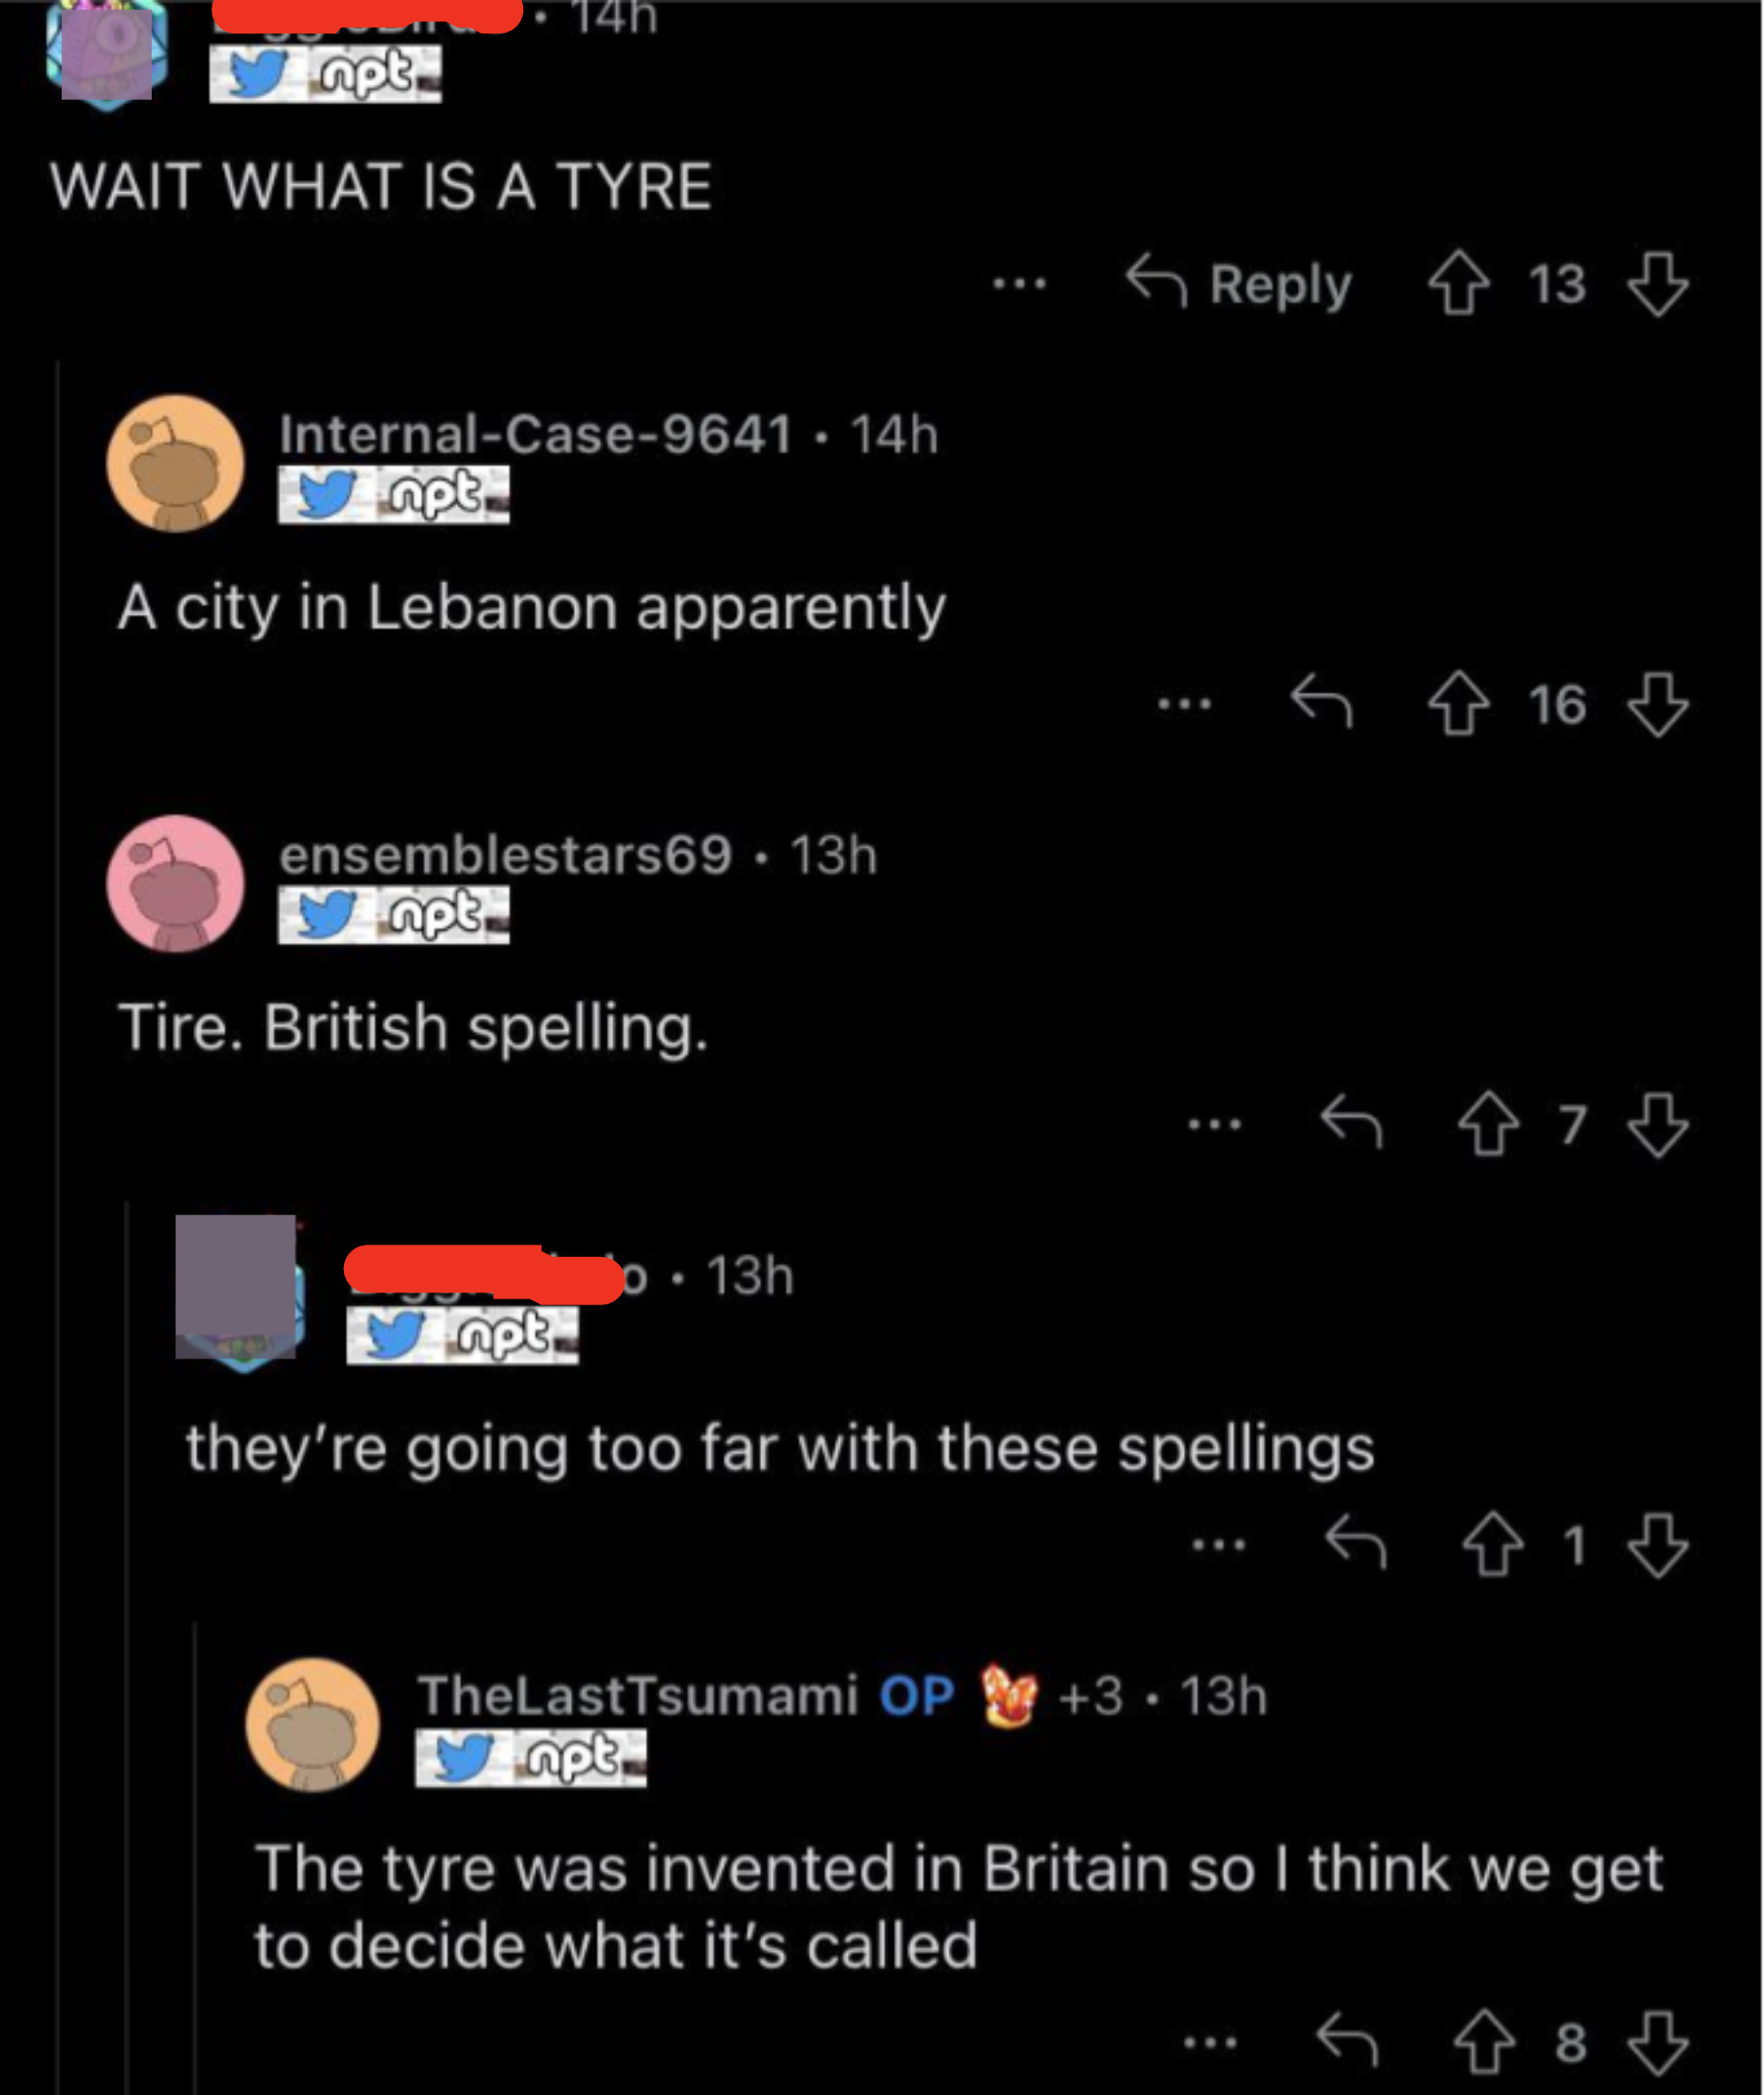 &quot;the tyre was invented in Britain...&quot;